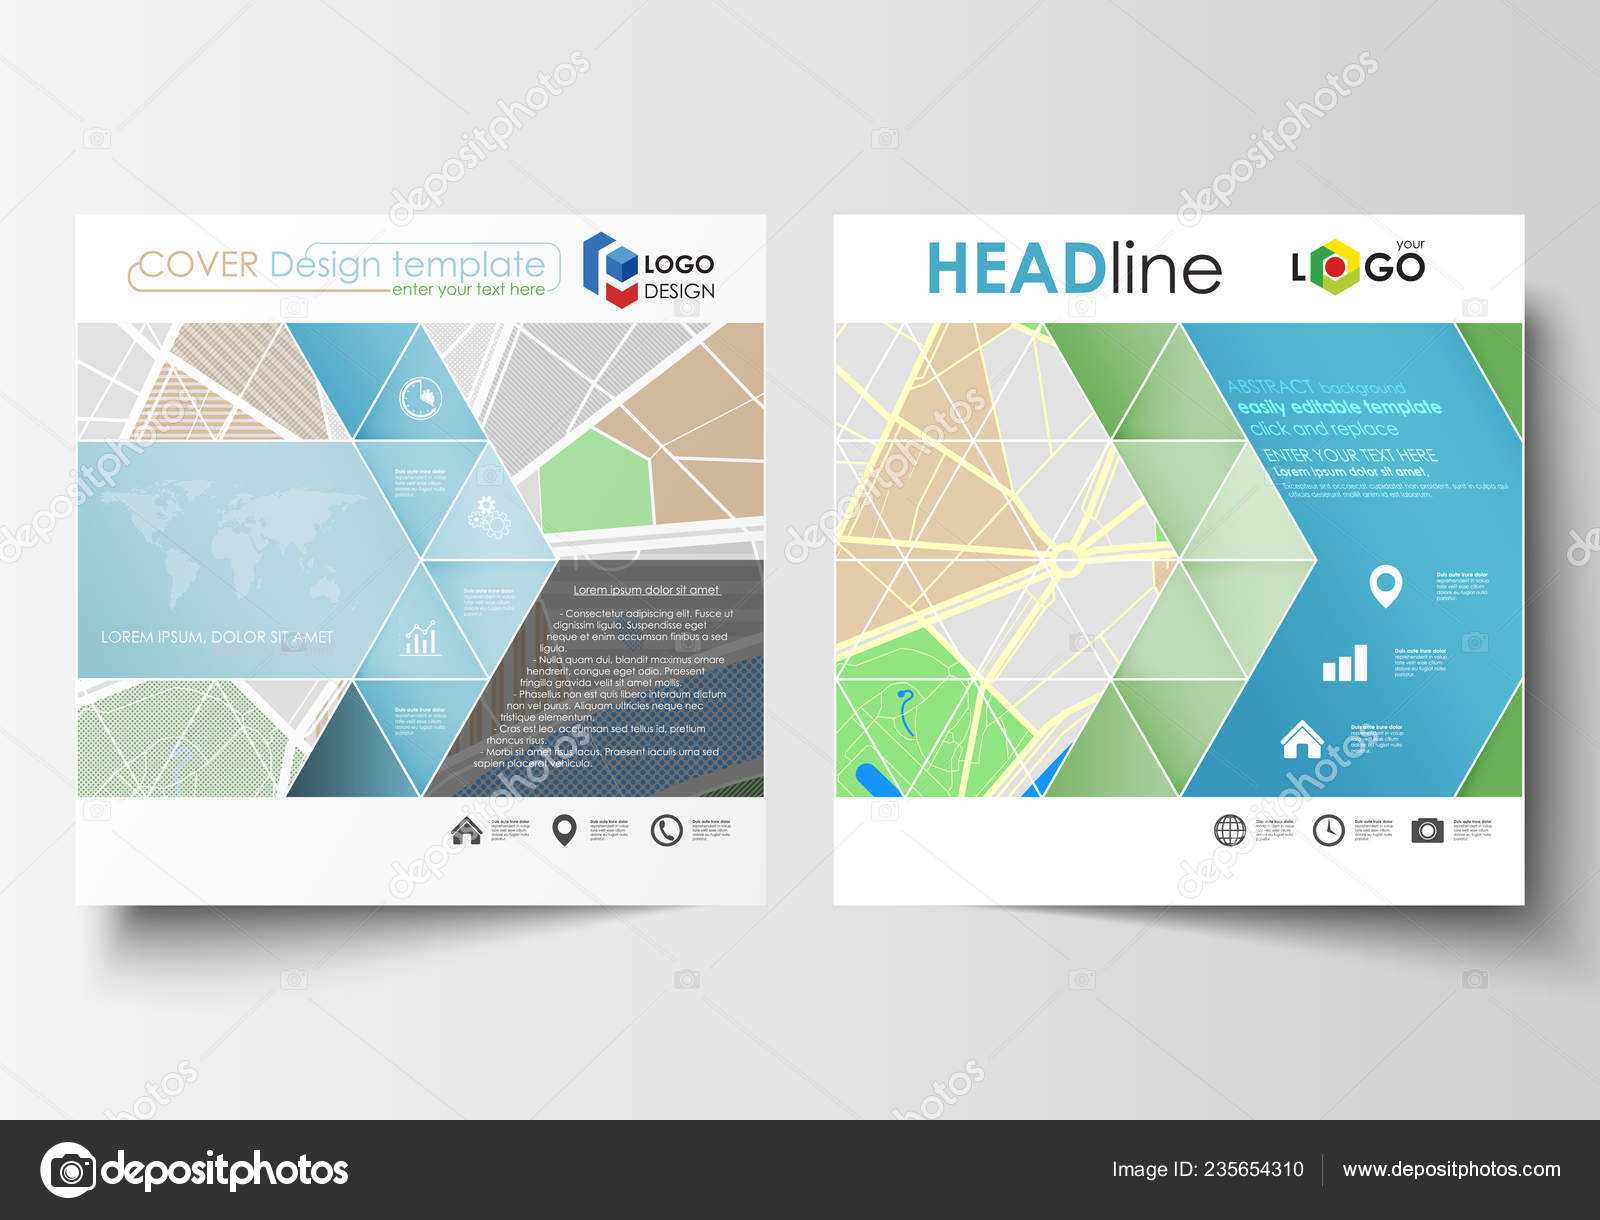 Business Templates For Square Brochure, Magazine, Flyer Within Blank City Map Template